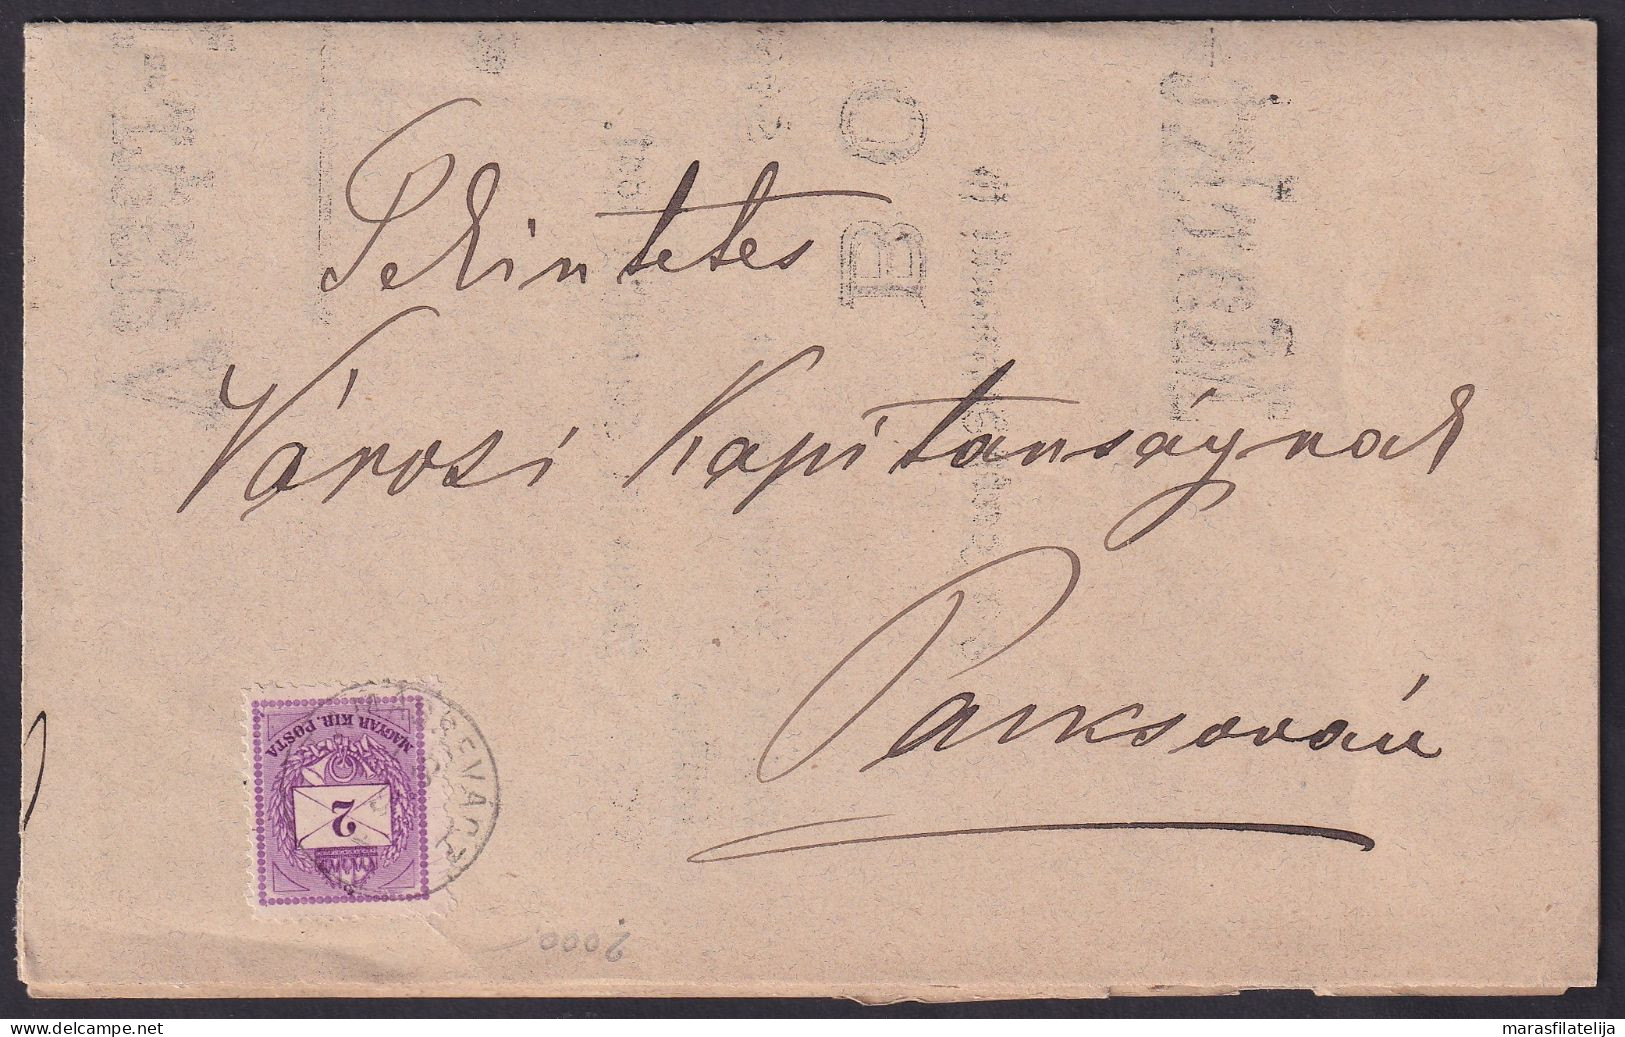 Hungary 1881, Serbia, Printed Matter From Botos (Fair Invitation) - Other & Unclassified